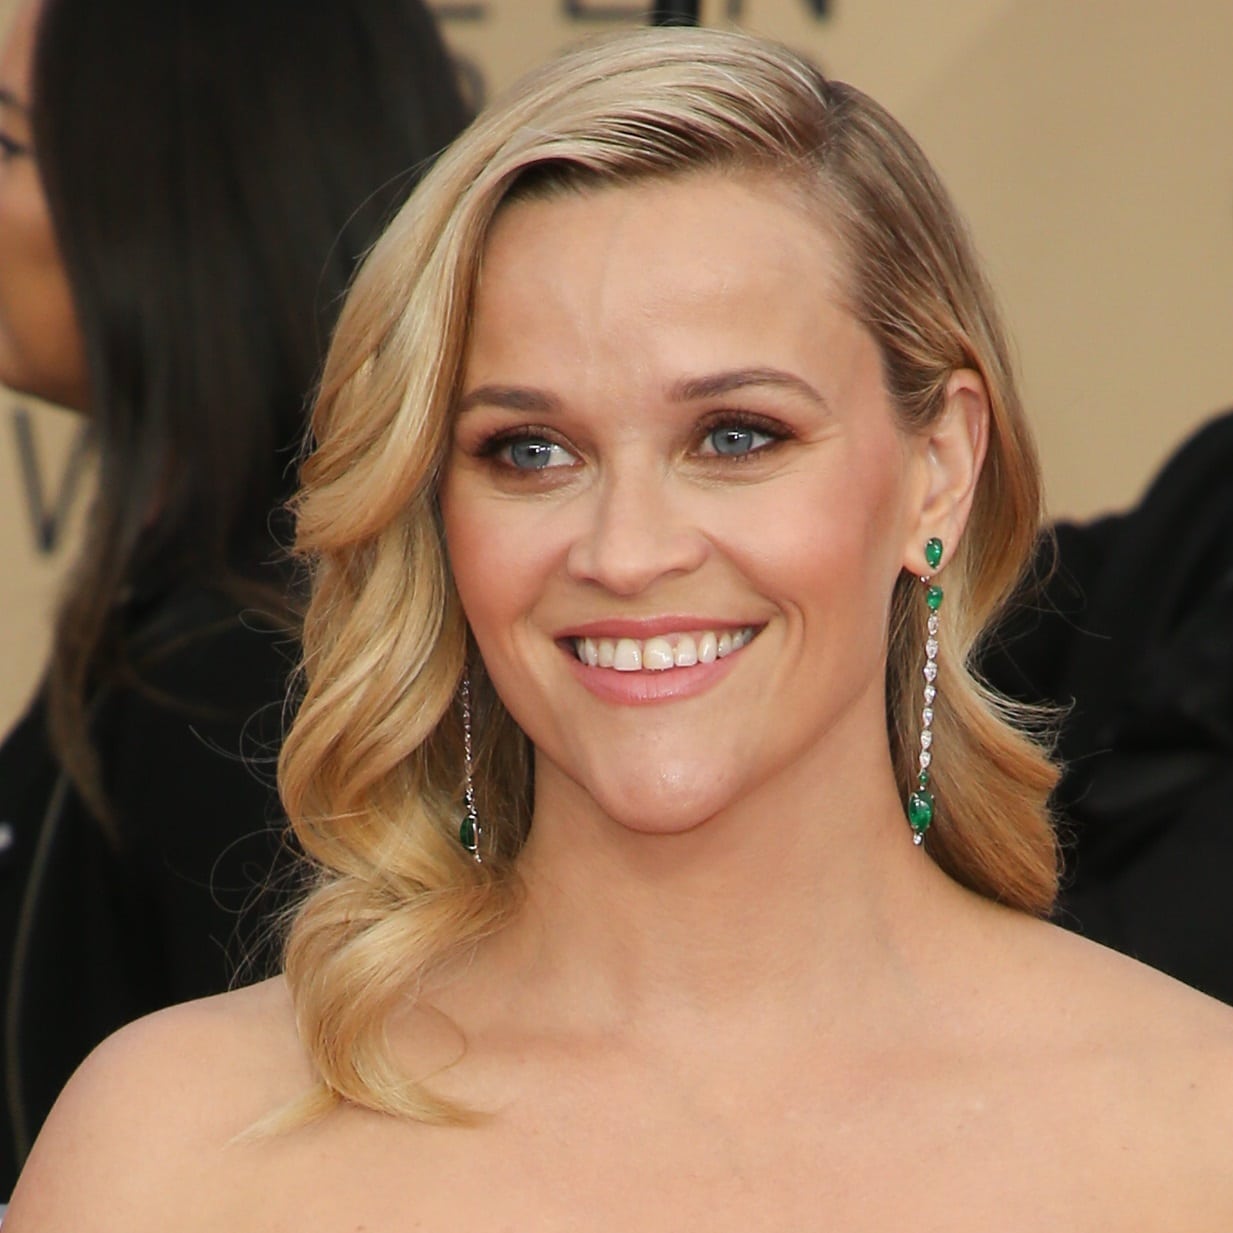 Reese Witherspoon showing off her striking Gismondi 1754 drop earrings